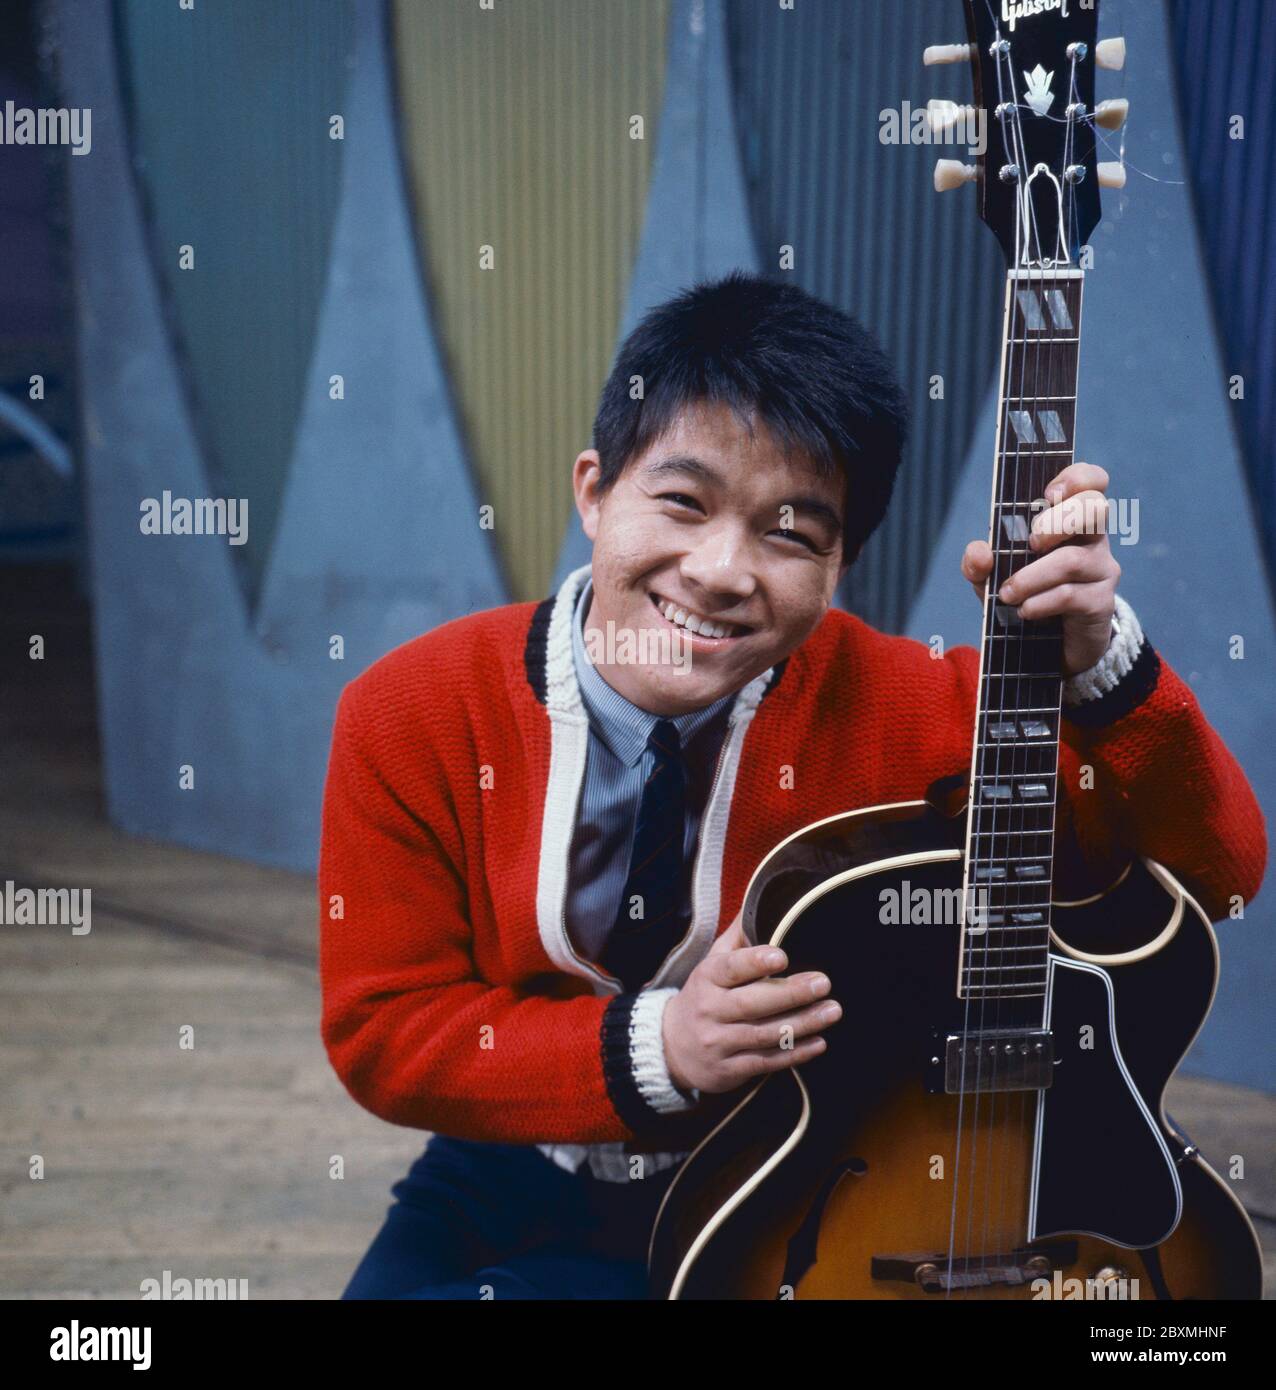 Kyu Sakamoto. (1941-1985) Japanese singer, best known outside Japan for his  international hit song "Ue o Muite Aruko" (known as "Sukiyaki" in English- speaking markets), which was sung in Japanese and sold over